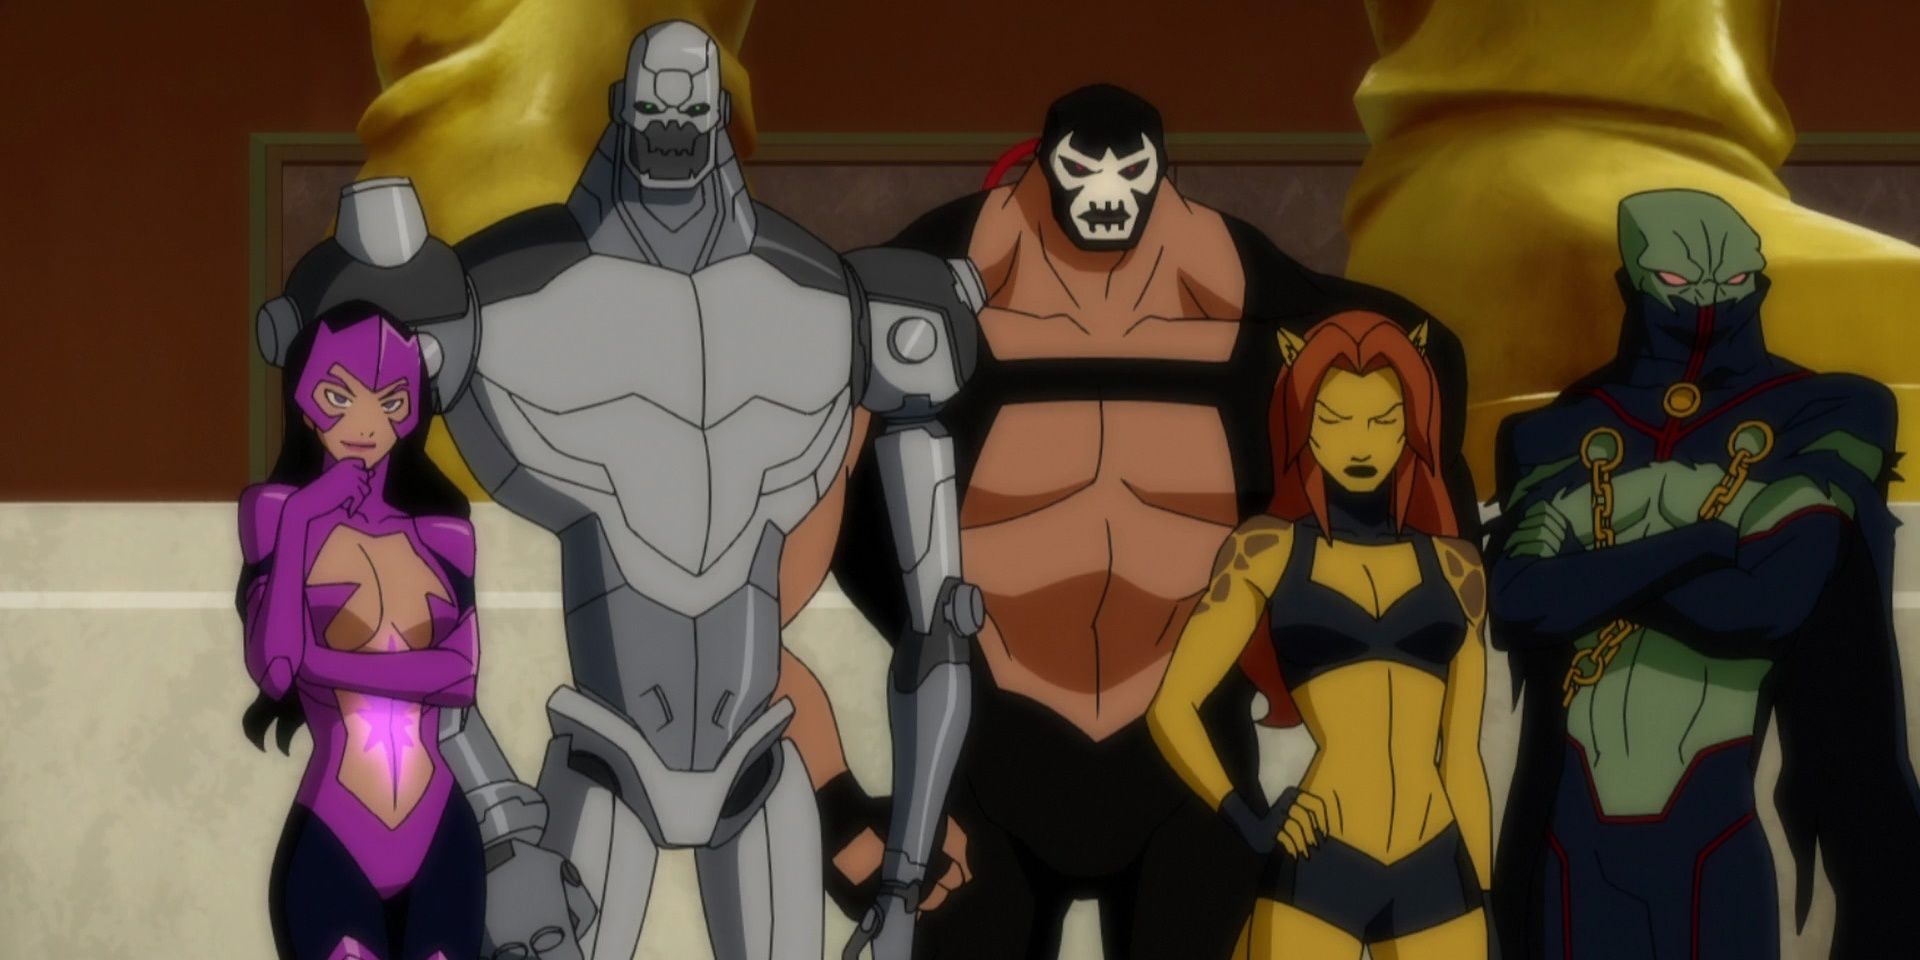 Metallo works with other villains in Justice League Doom